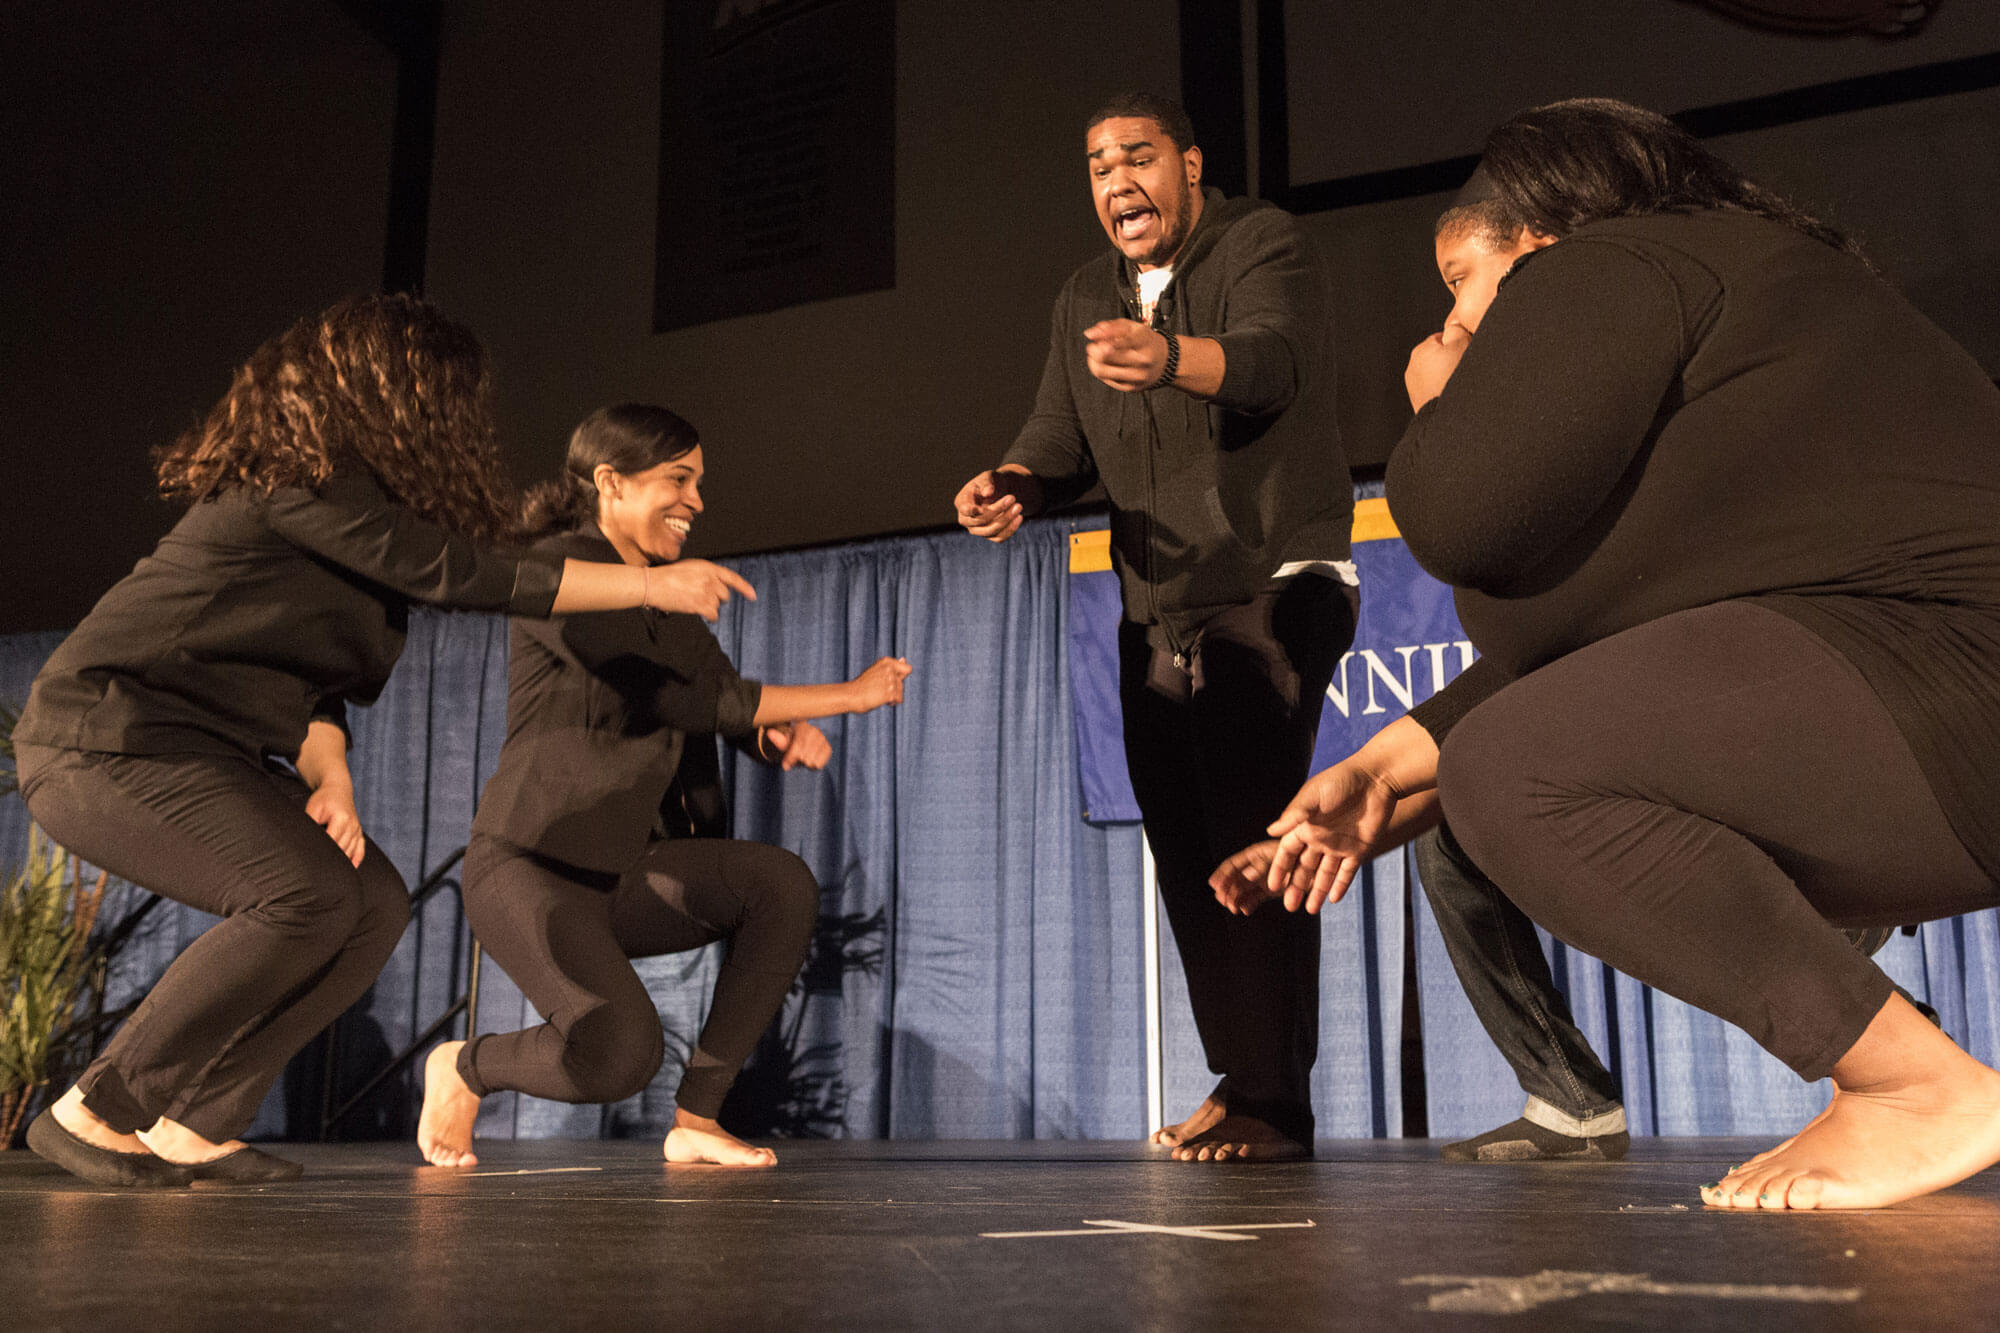 Hip hop performers on stage during Quinnipiac's Black History Month event.